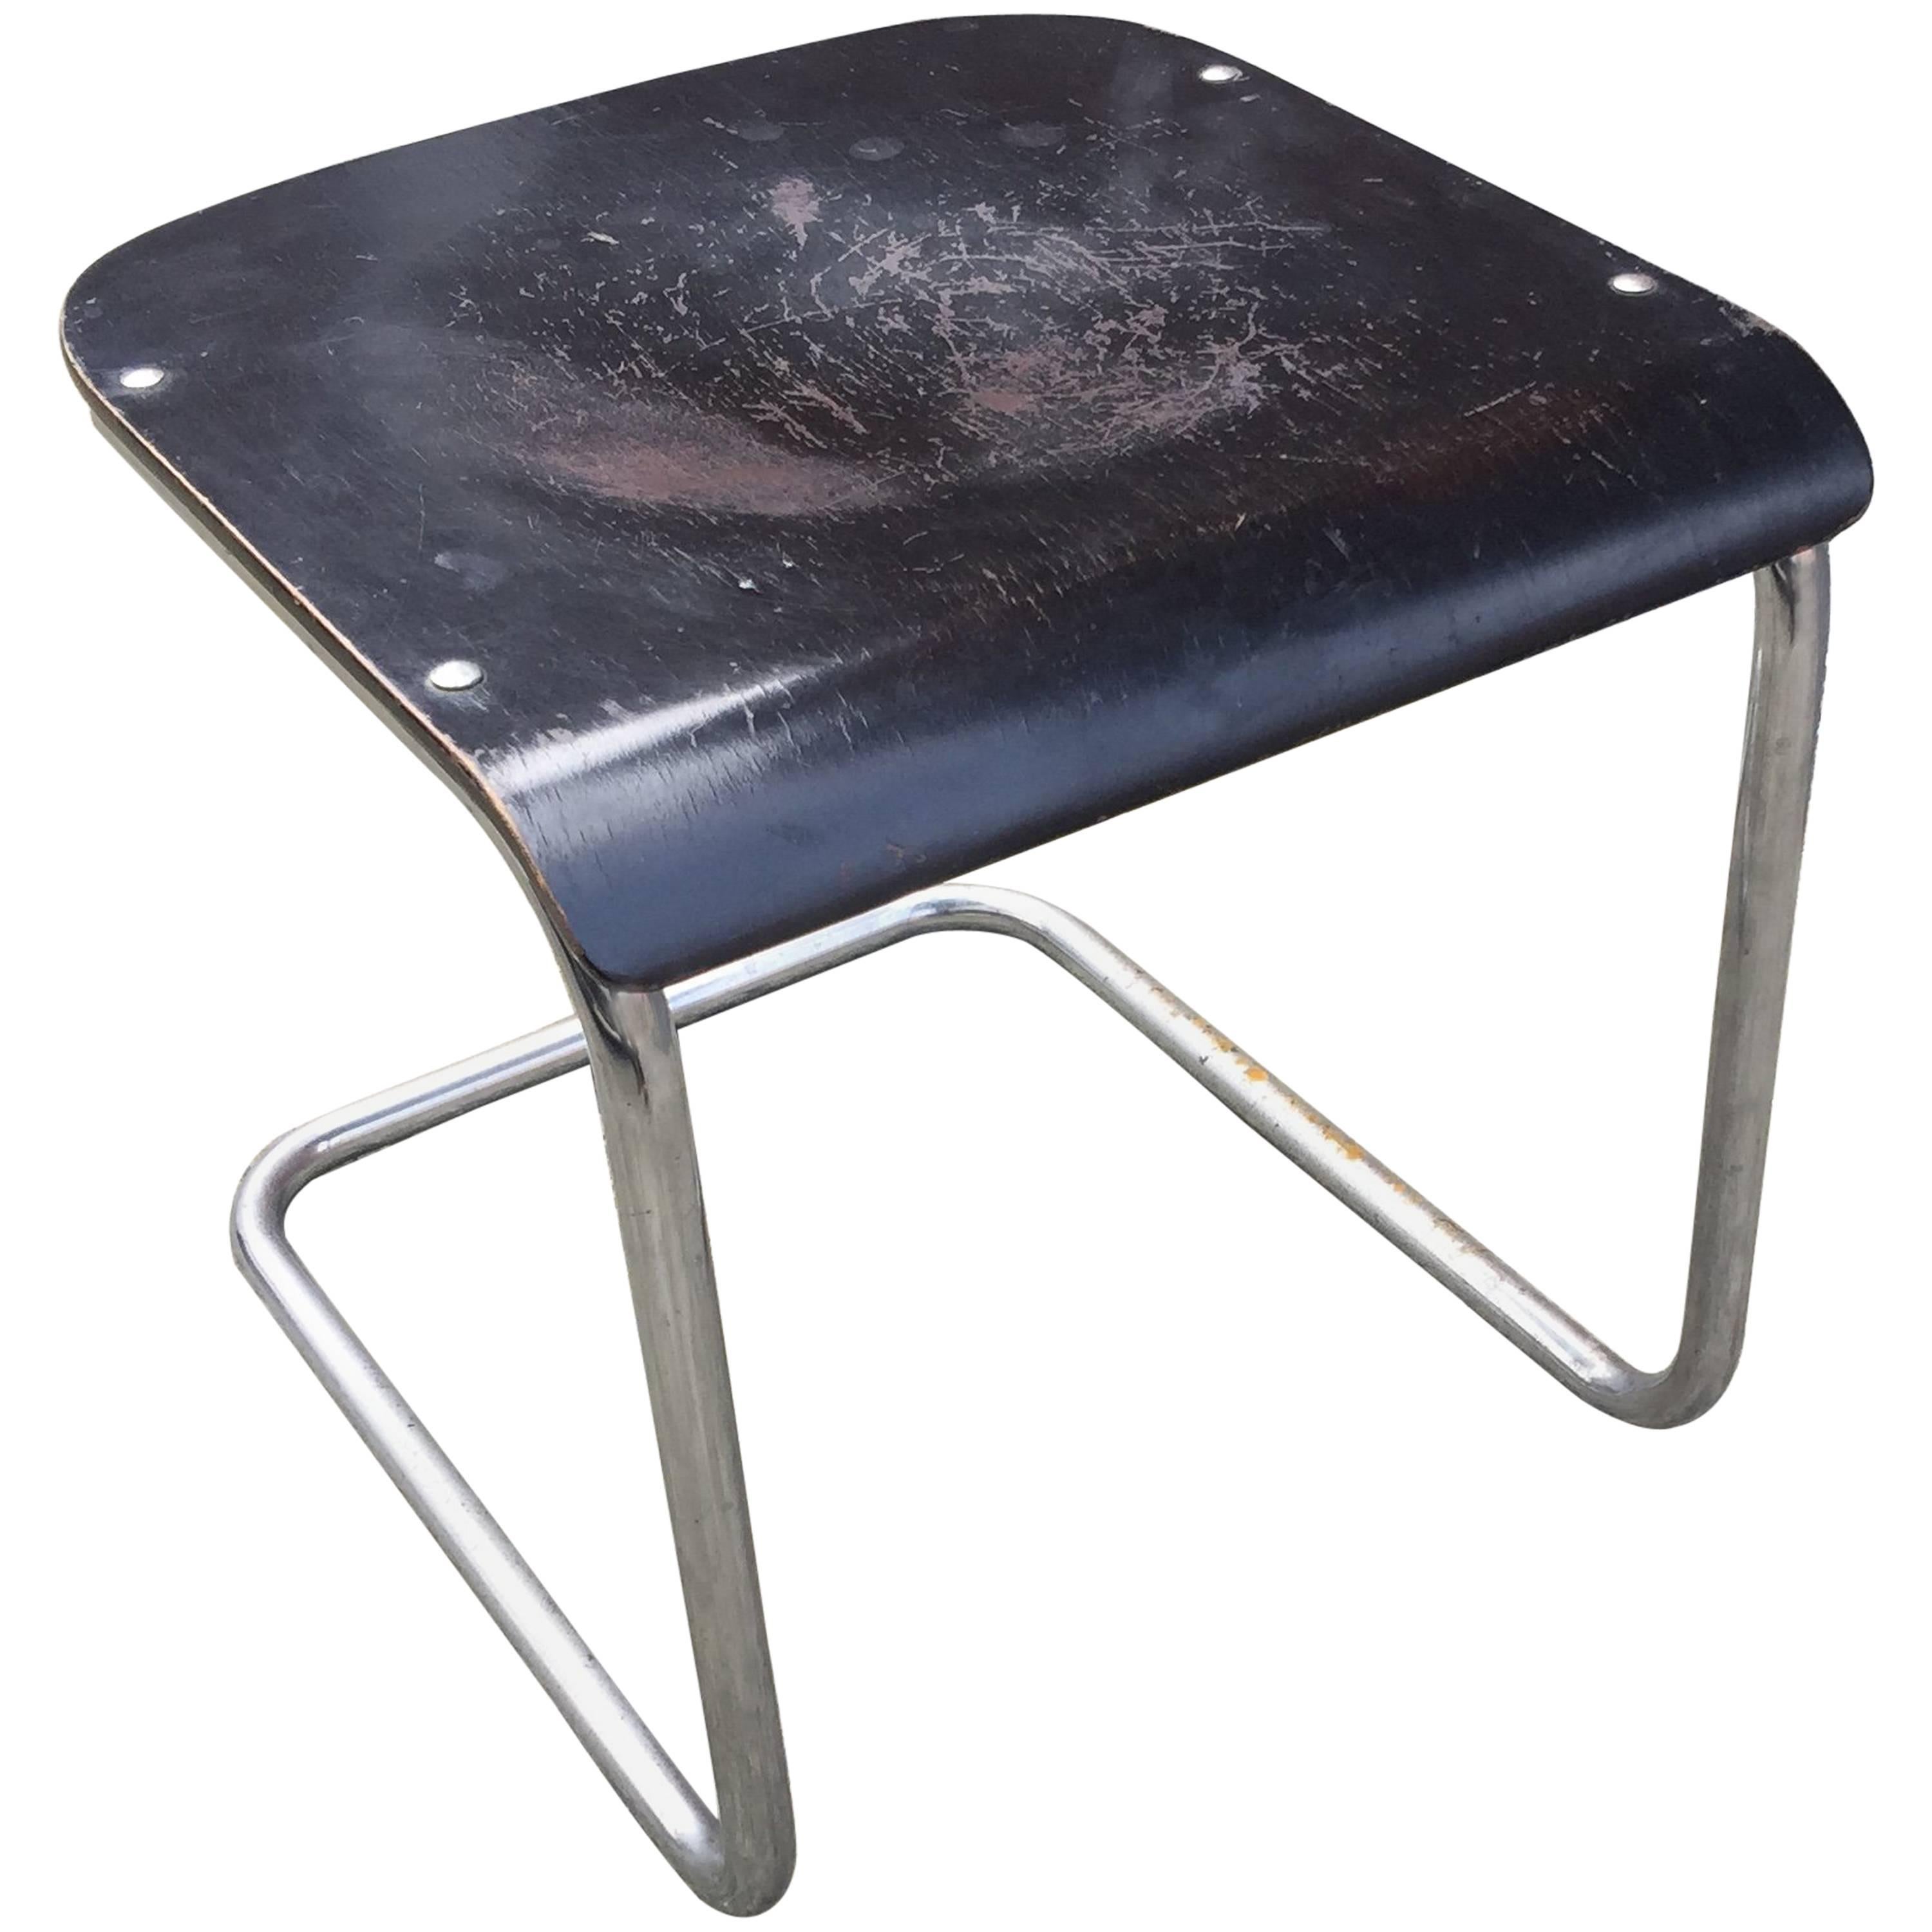 Mart Stam, H22 Stool, Chrome Metal Base, Lacquered Wood Seat